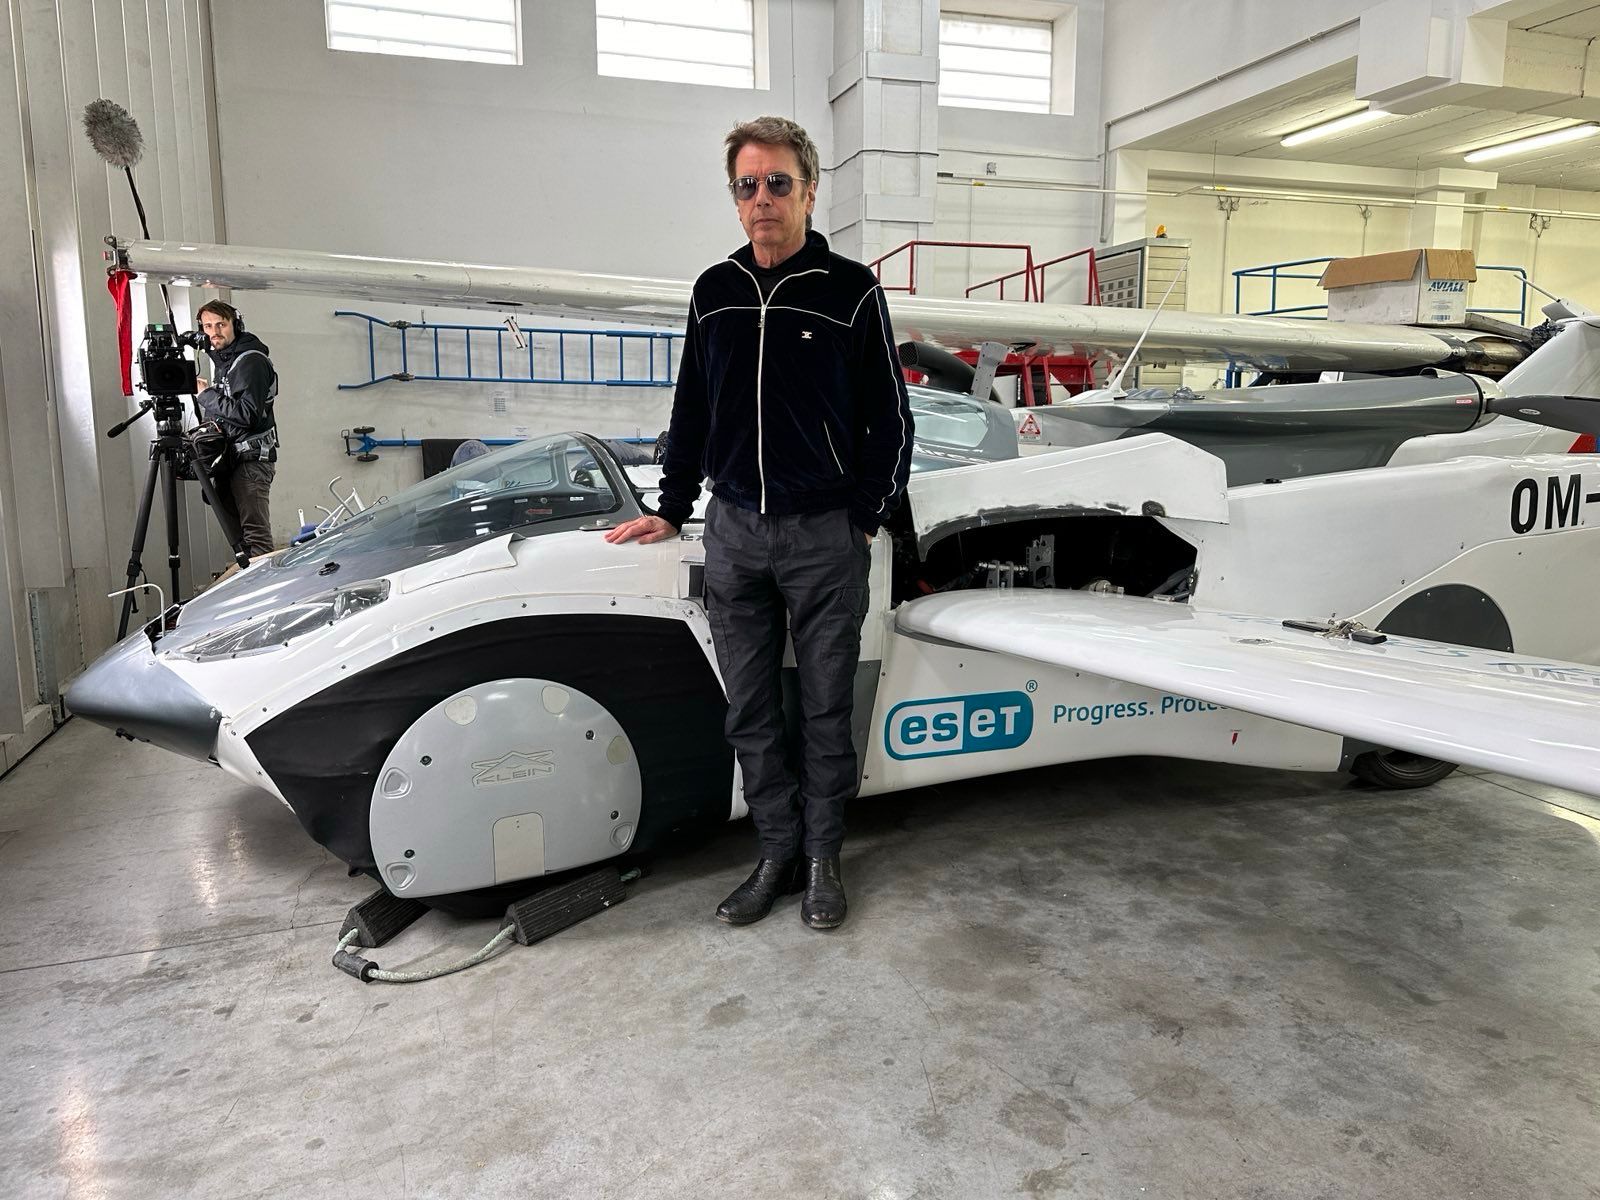 Music legend Jean-Michel Jarre, 75, completed two flights in the flying car in SlovakiaCredit: KleinVision